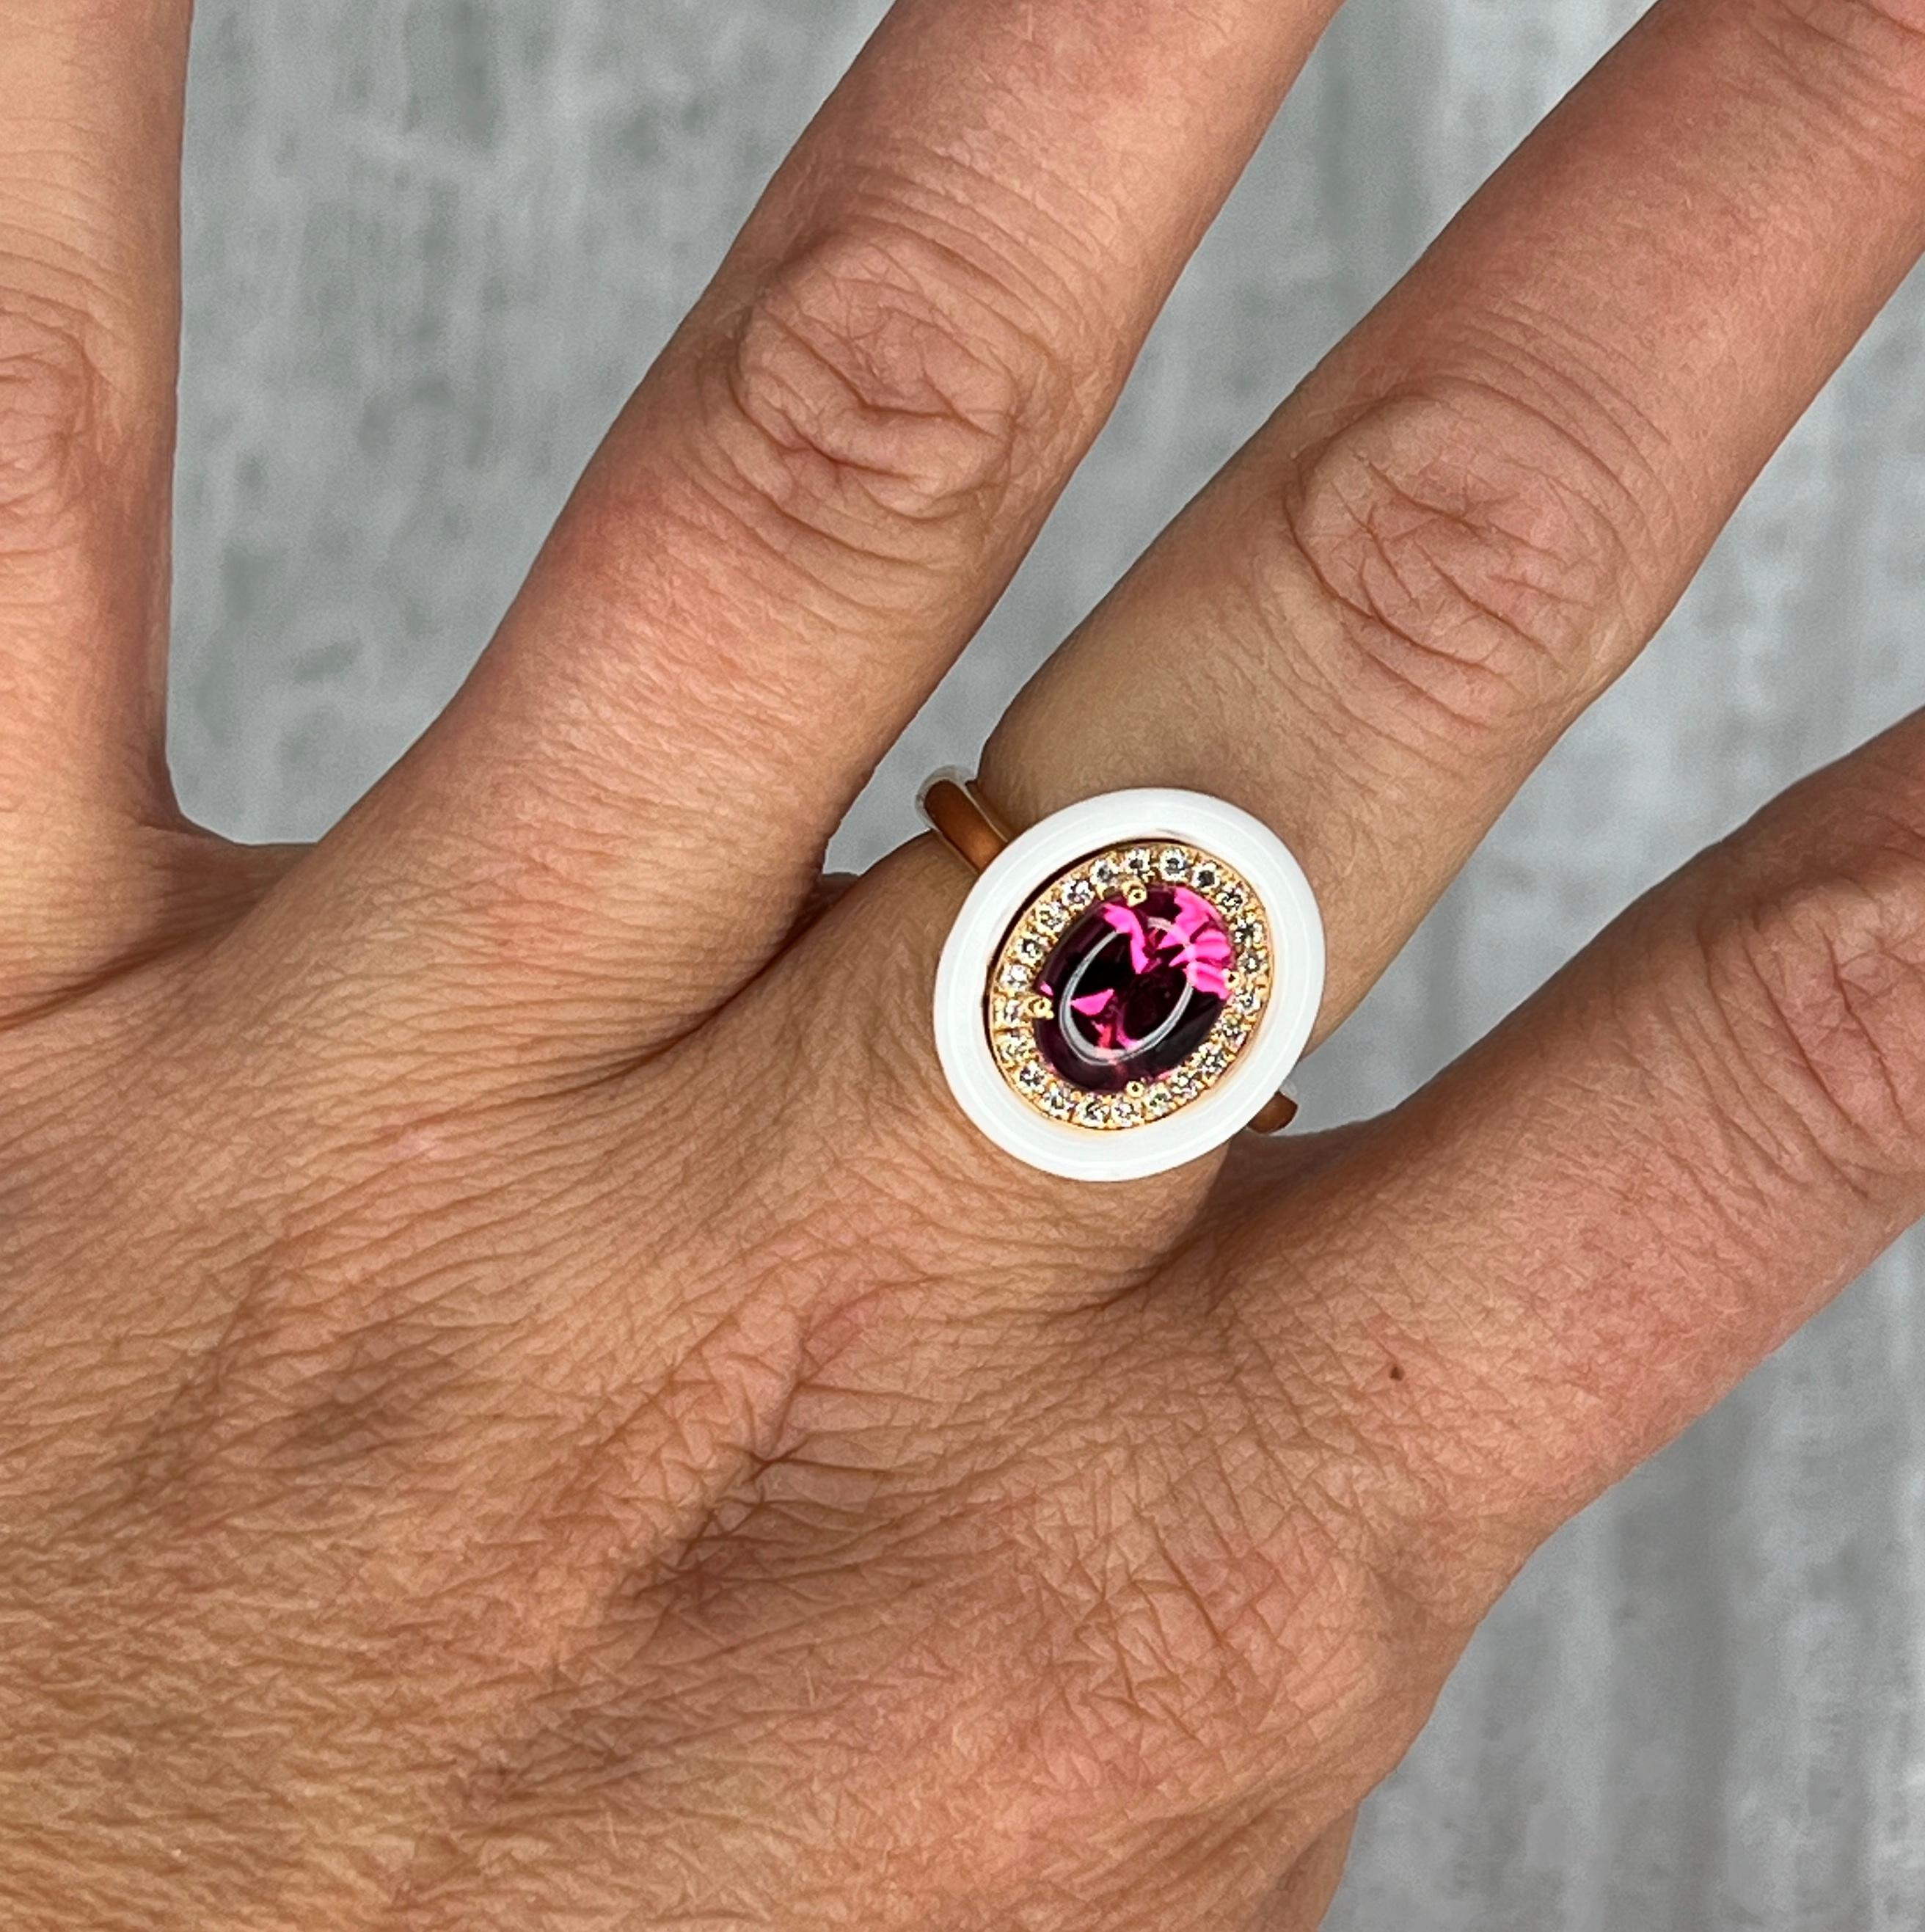 We present you this new color variation of this popular ring from S.Georgios designer with white Enamel, Pink Tourmaline, and Diamonds in 18 Karat Rose Gold. This stunning piece features a solitaire 1.85 Carats Cabochon Pink Tourmaline surrounded